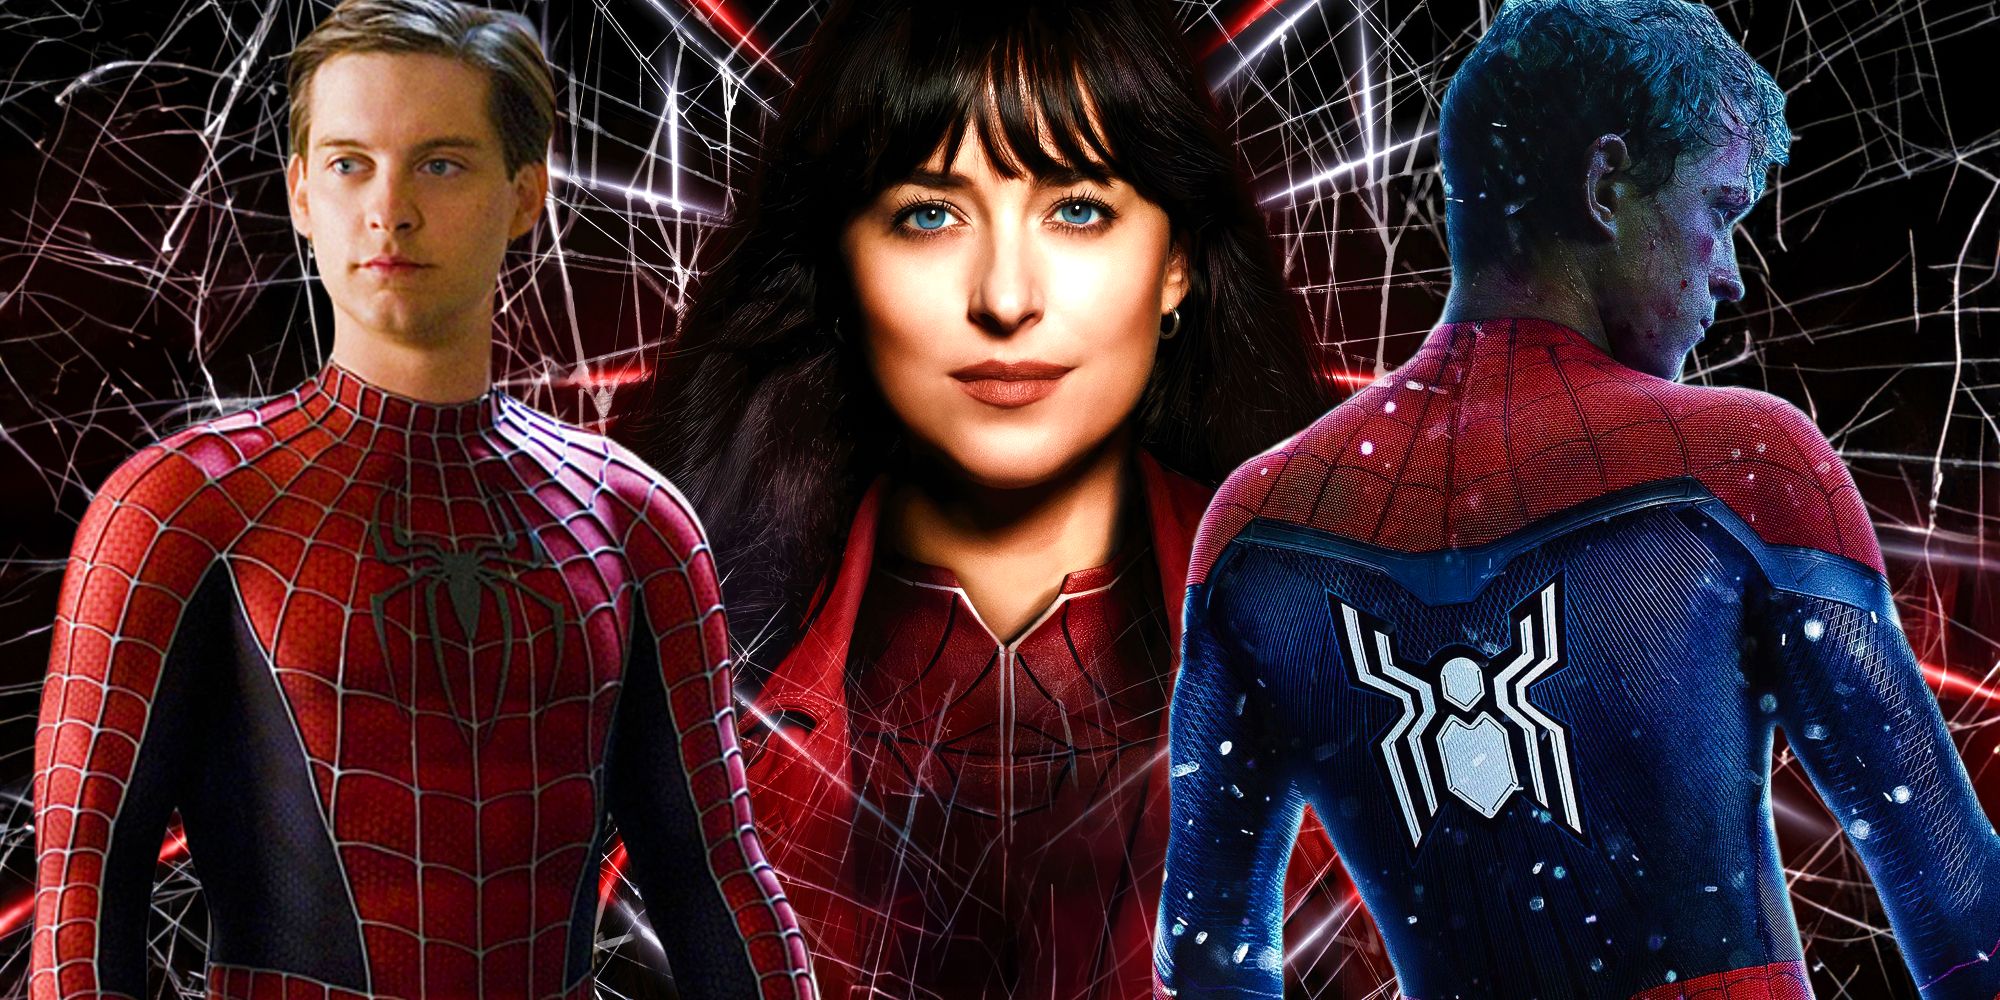 Dakota Johnson as Madame Web in the film's poster between Tobey Maguire and Tom Holland as Spider-Man 